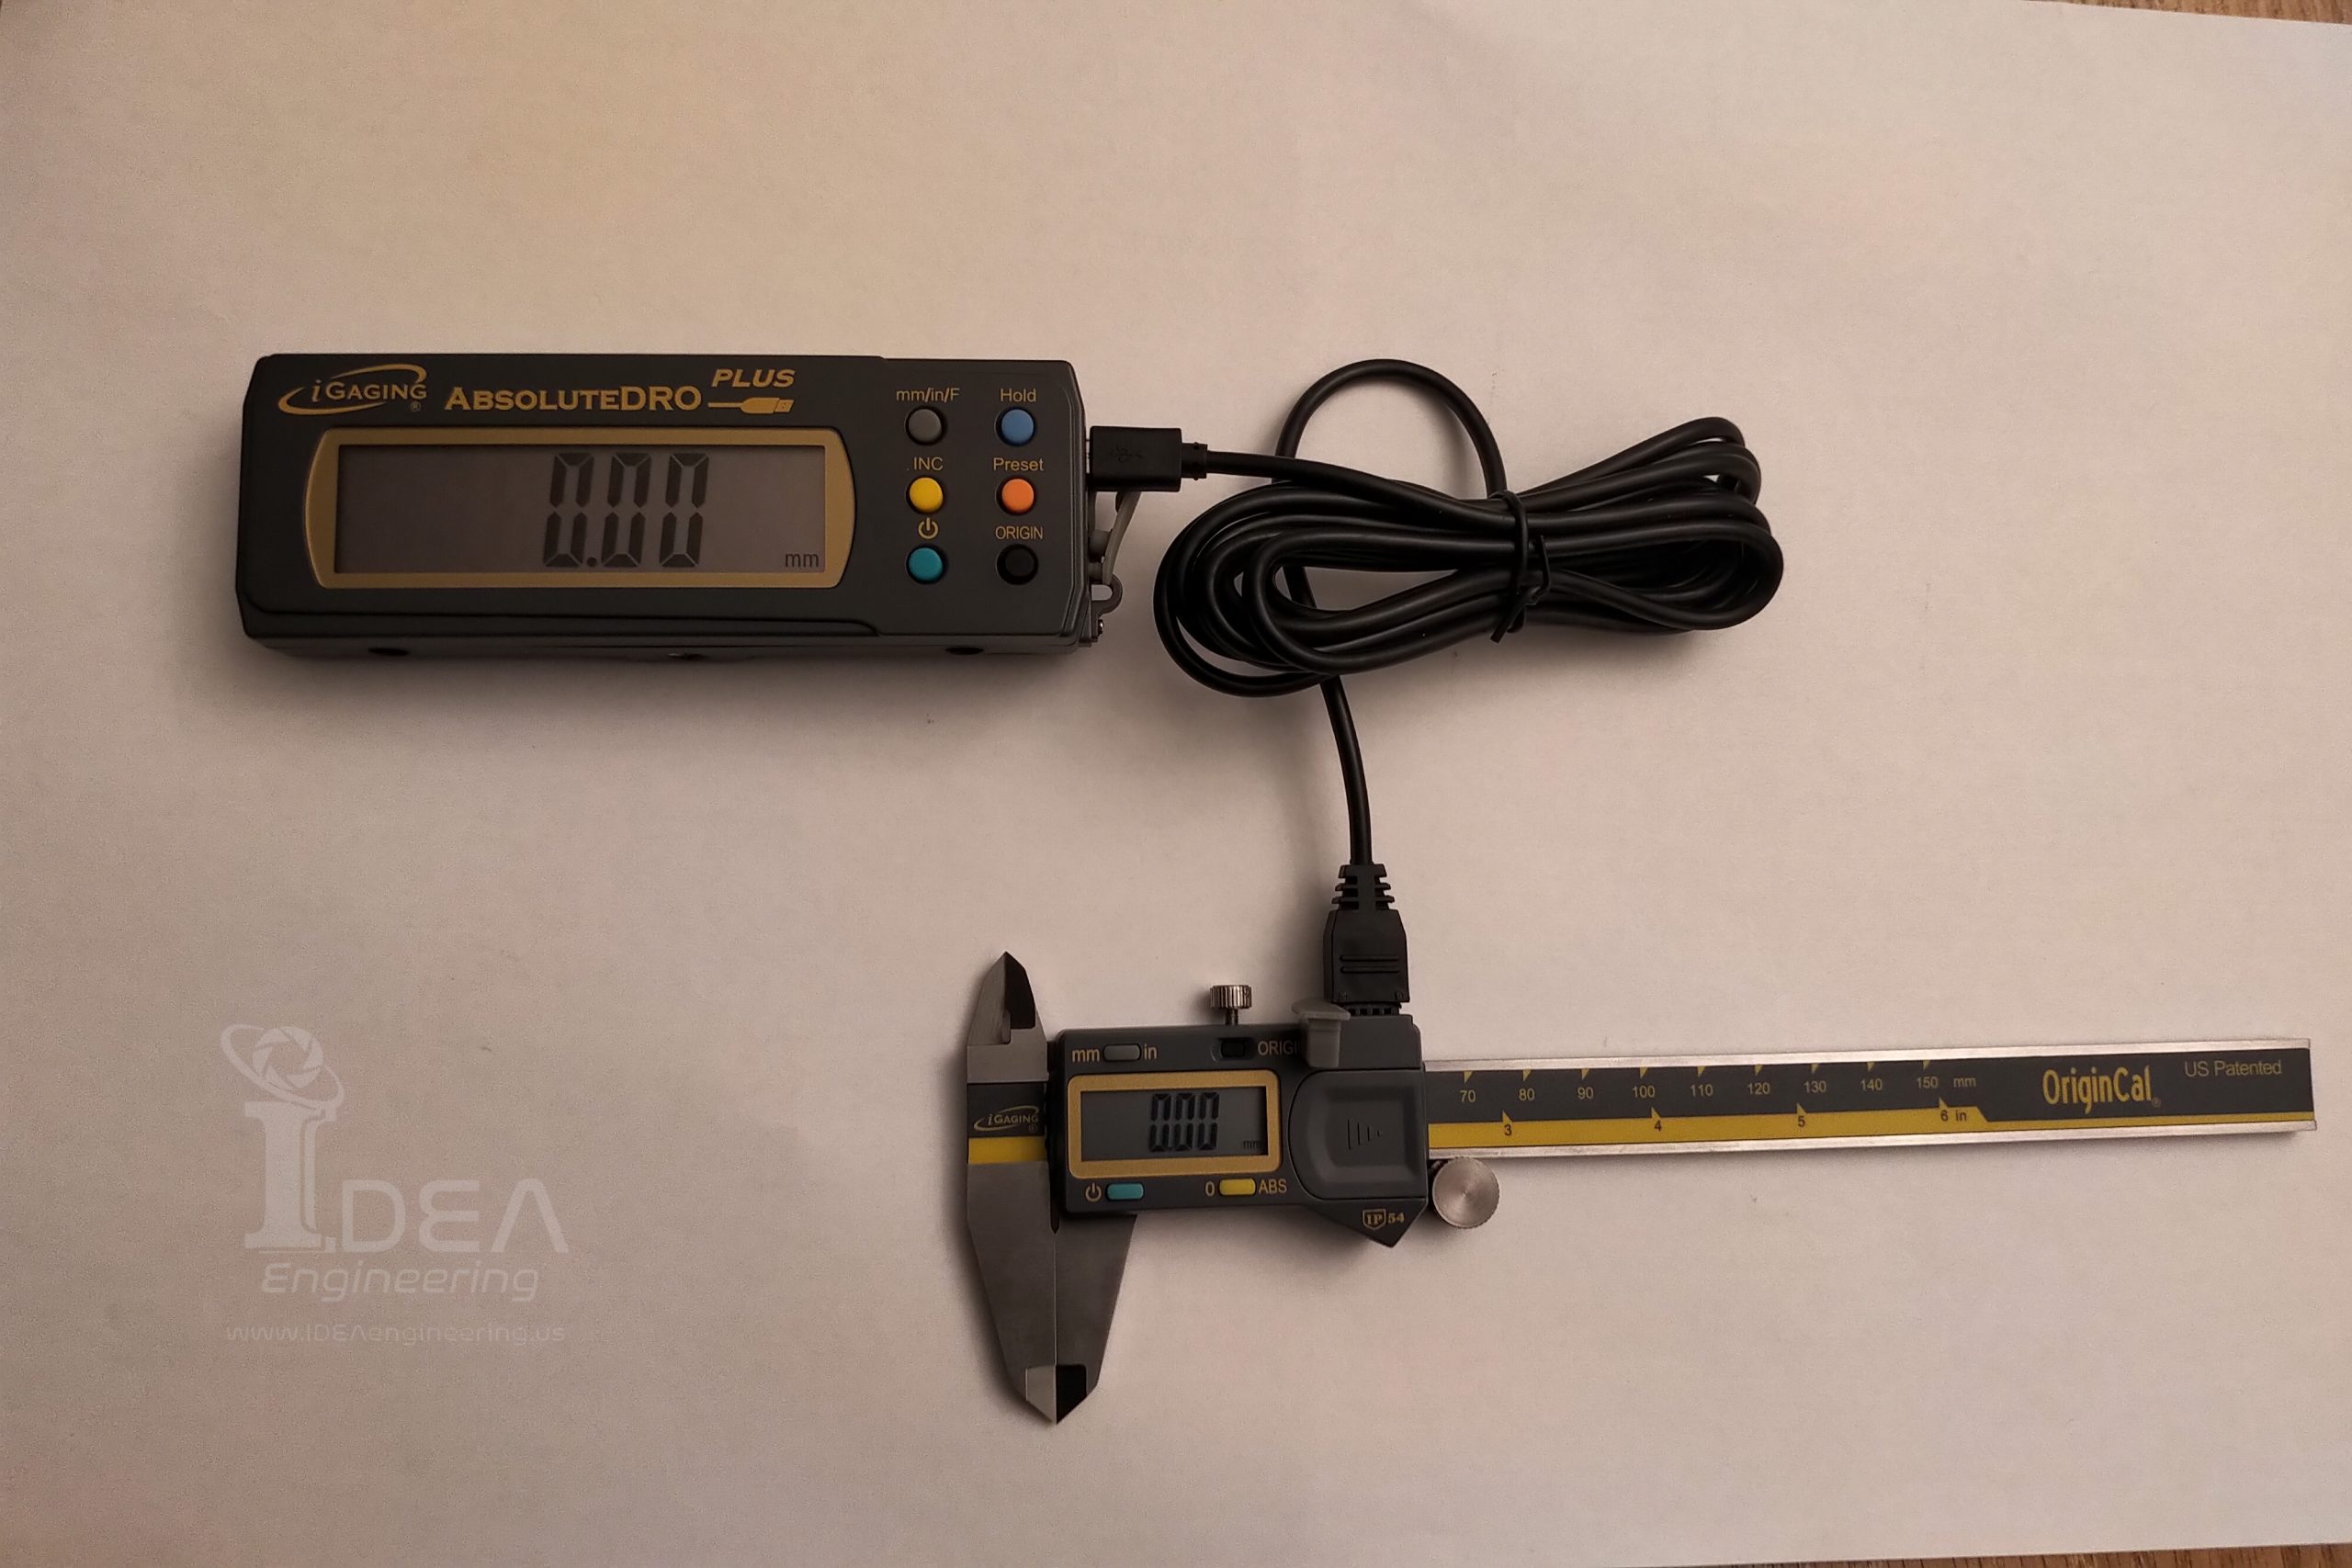 ABSOLUTE ORIGIN 0-6" Digital Electronic Caliper - IP54 Protection with Absolute DRO (digital readout)